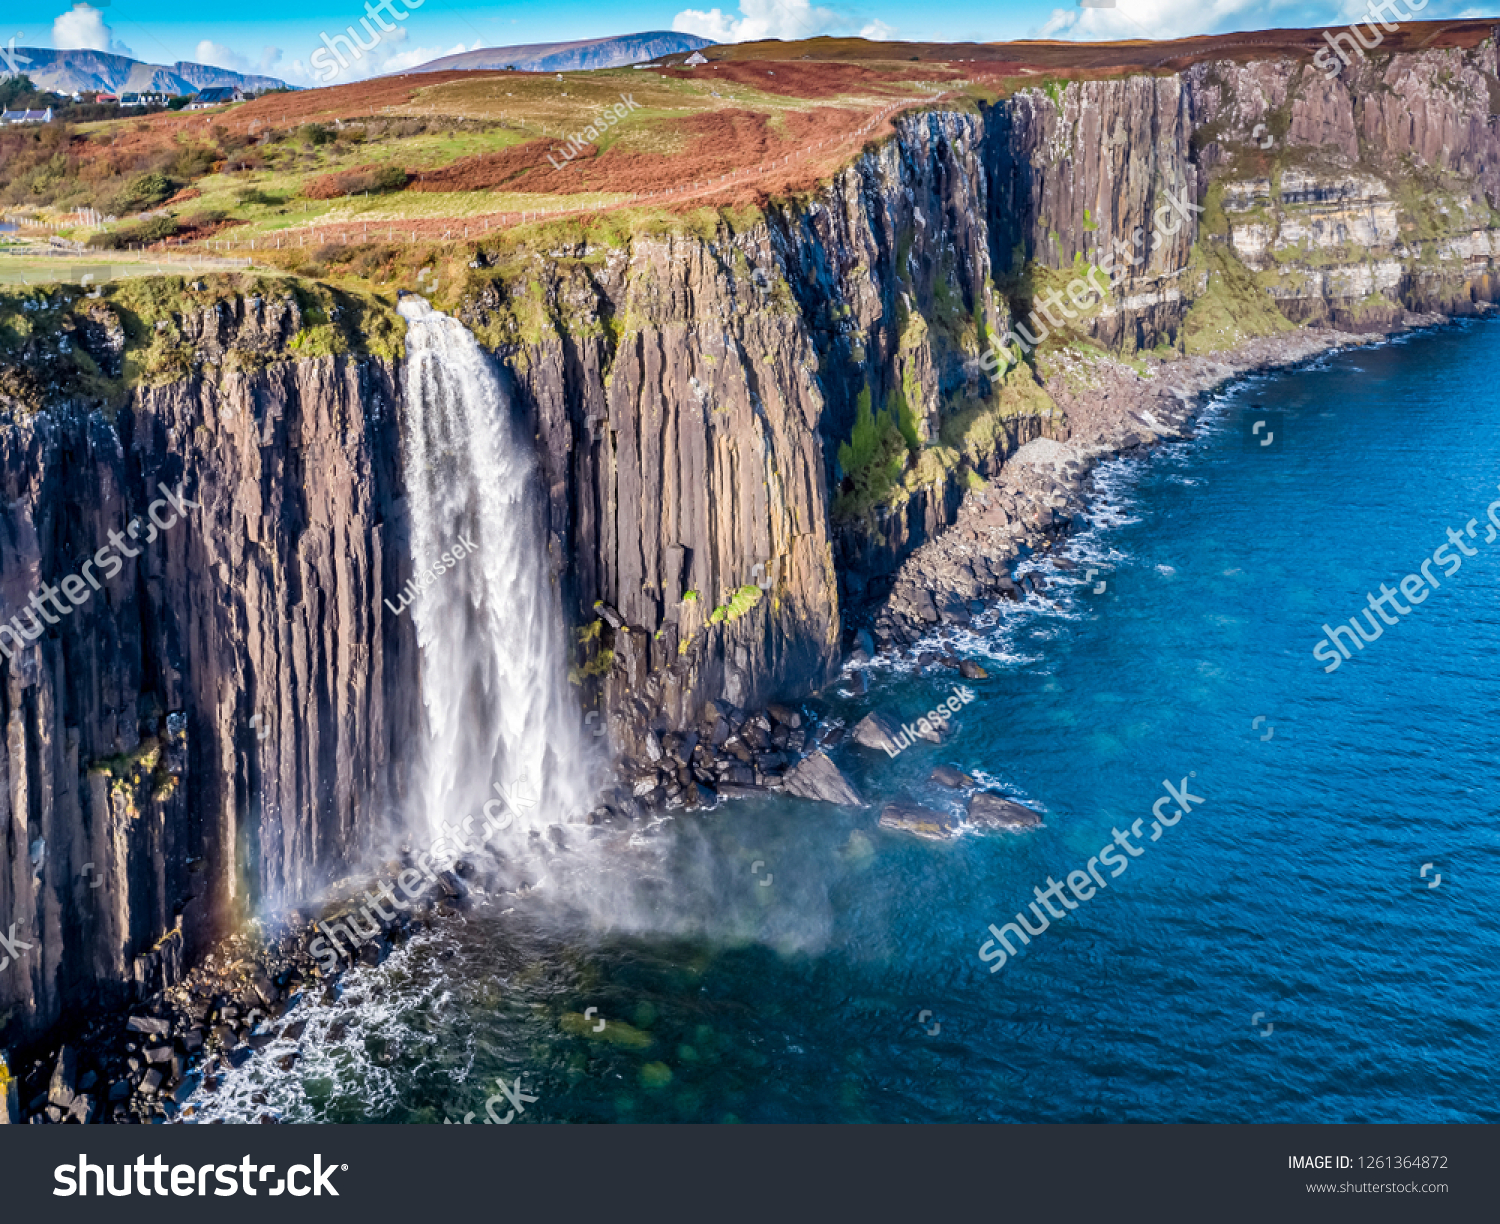 Aerial view of the dramatic coastline at the cliffs by Staffin with the famous Kilt Rock waterfall - Isle of Skye - Scotland. #1261364872